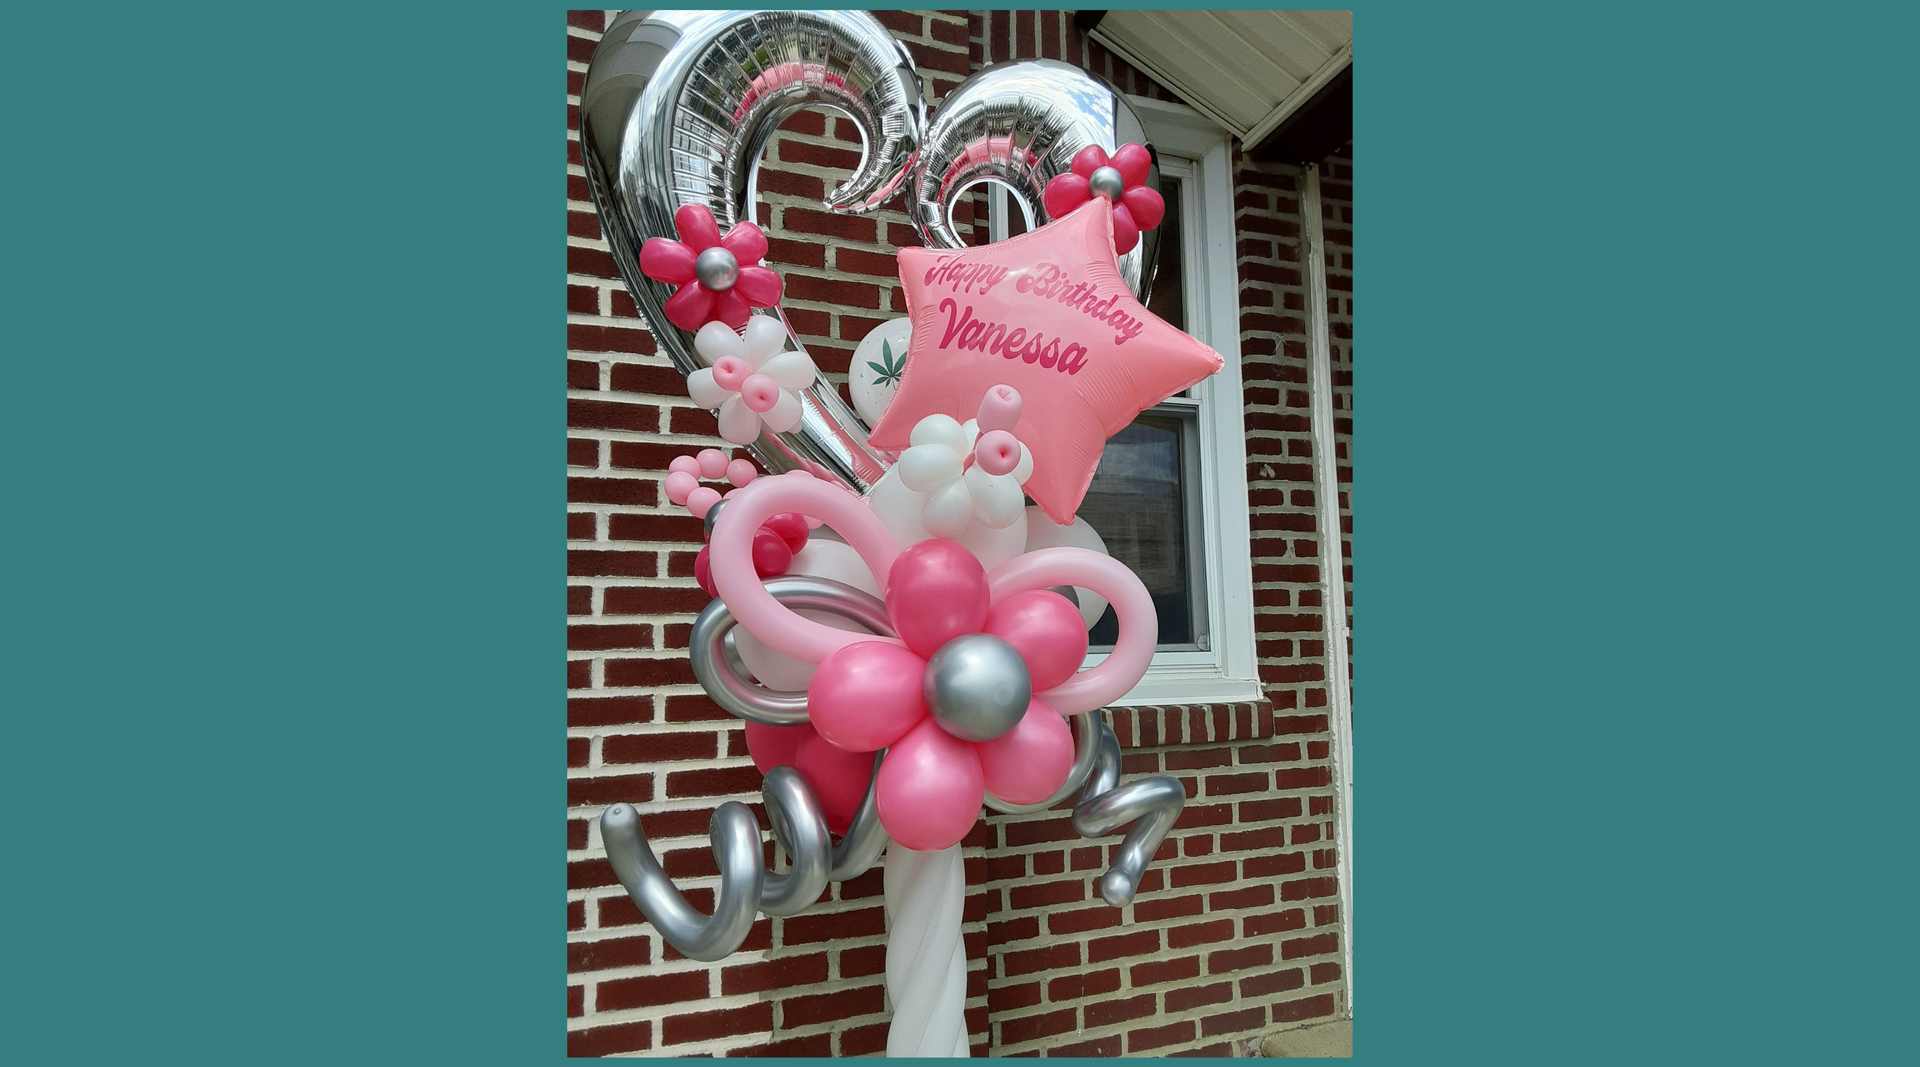 Balloons for all occasions!
